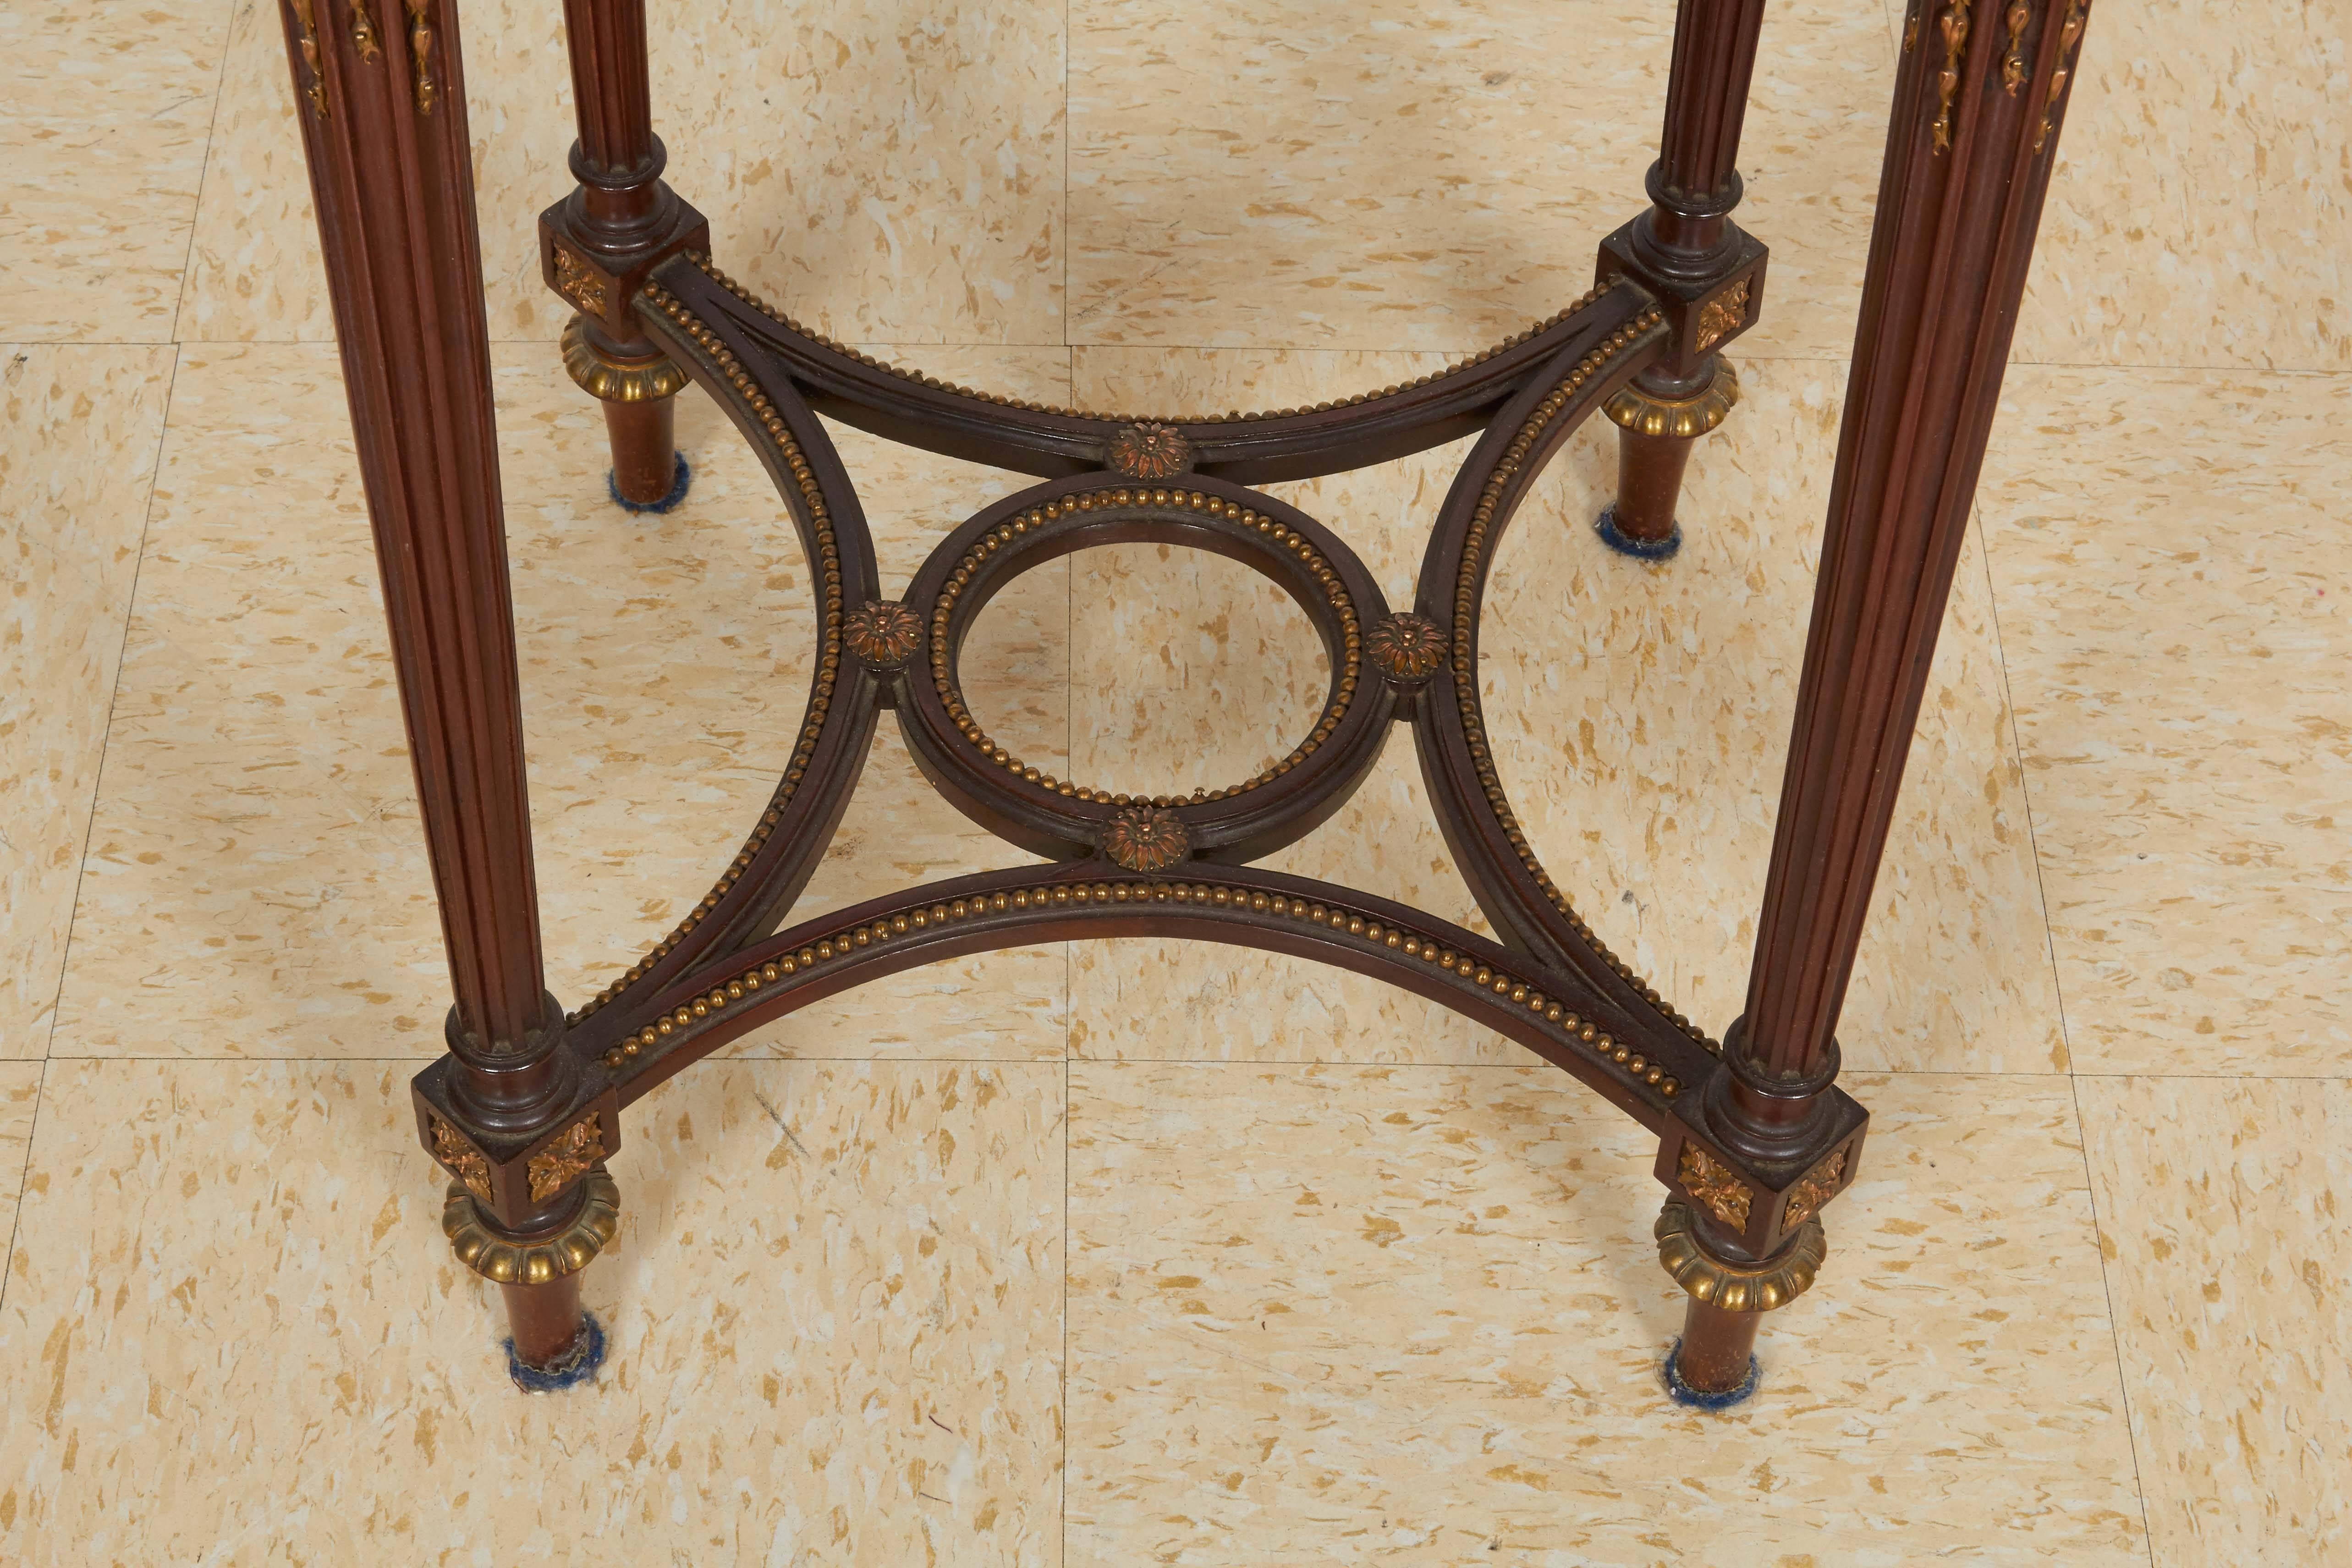 A French bronze-mounted marble-top gueridon round table attributed to Francois Linke.

High quality mounts, in the style and quality of Francois Linke.

31